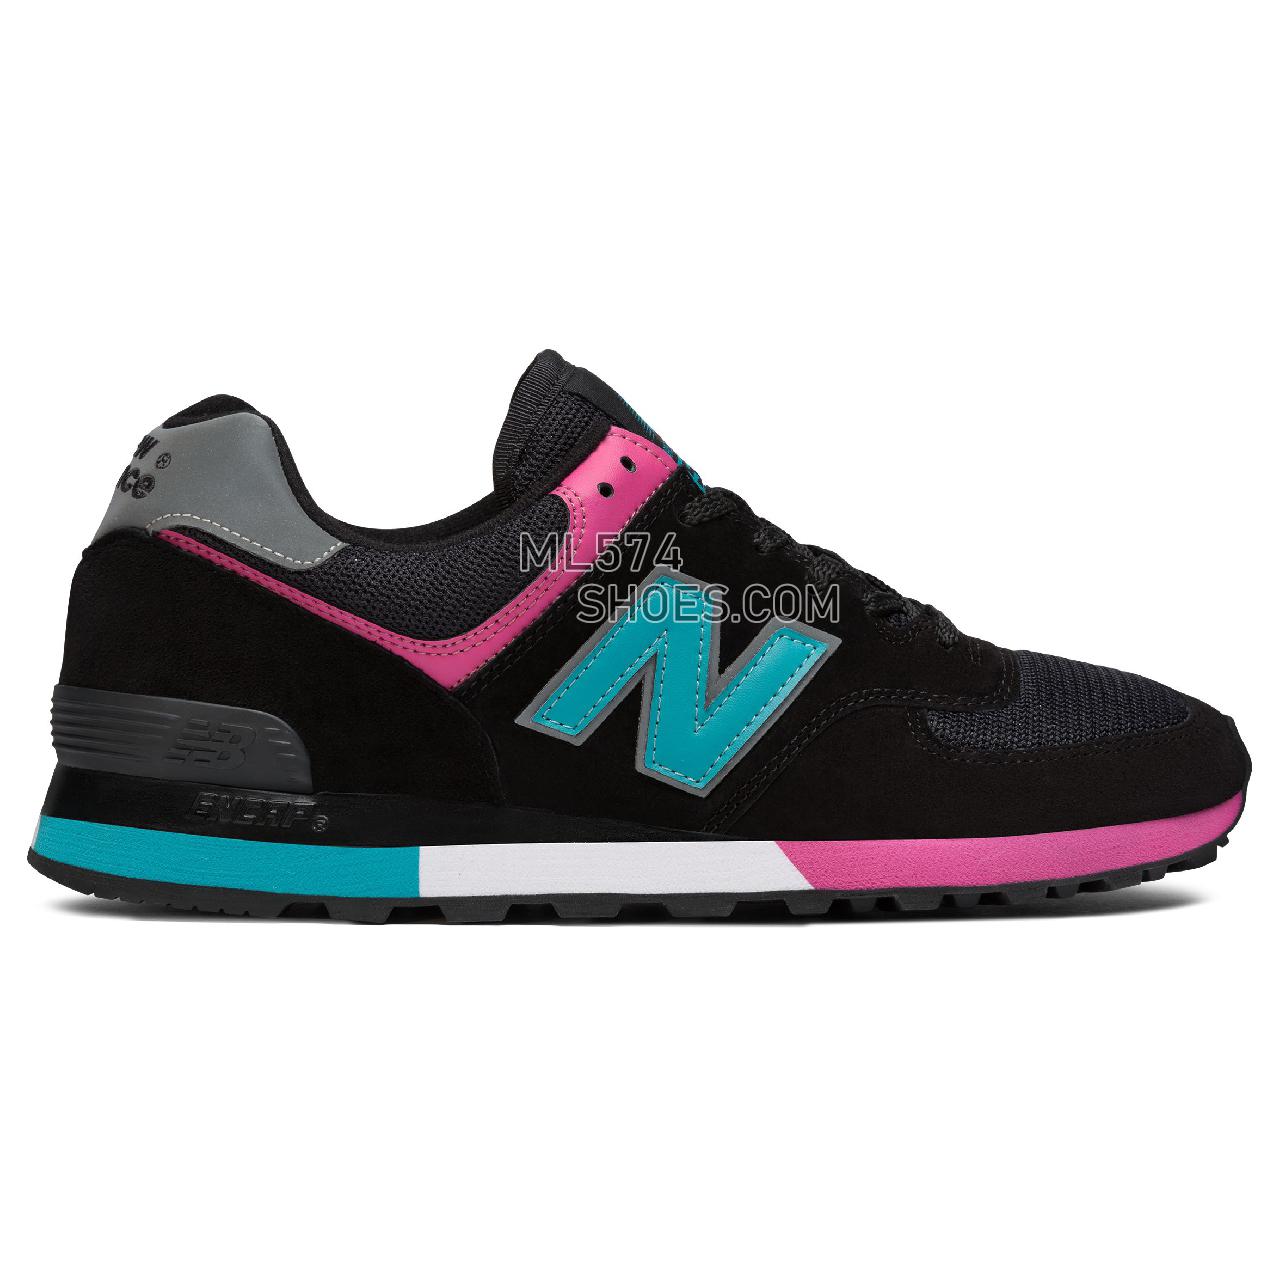 New Balance 576 Made in UK - Men's 576 - Classic Black with Lake Blue - OM576BTP